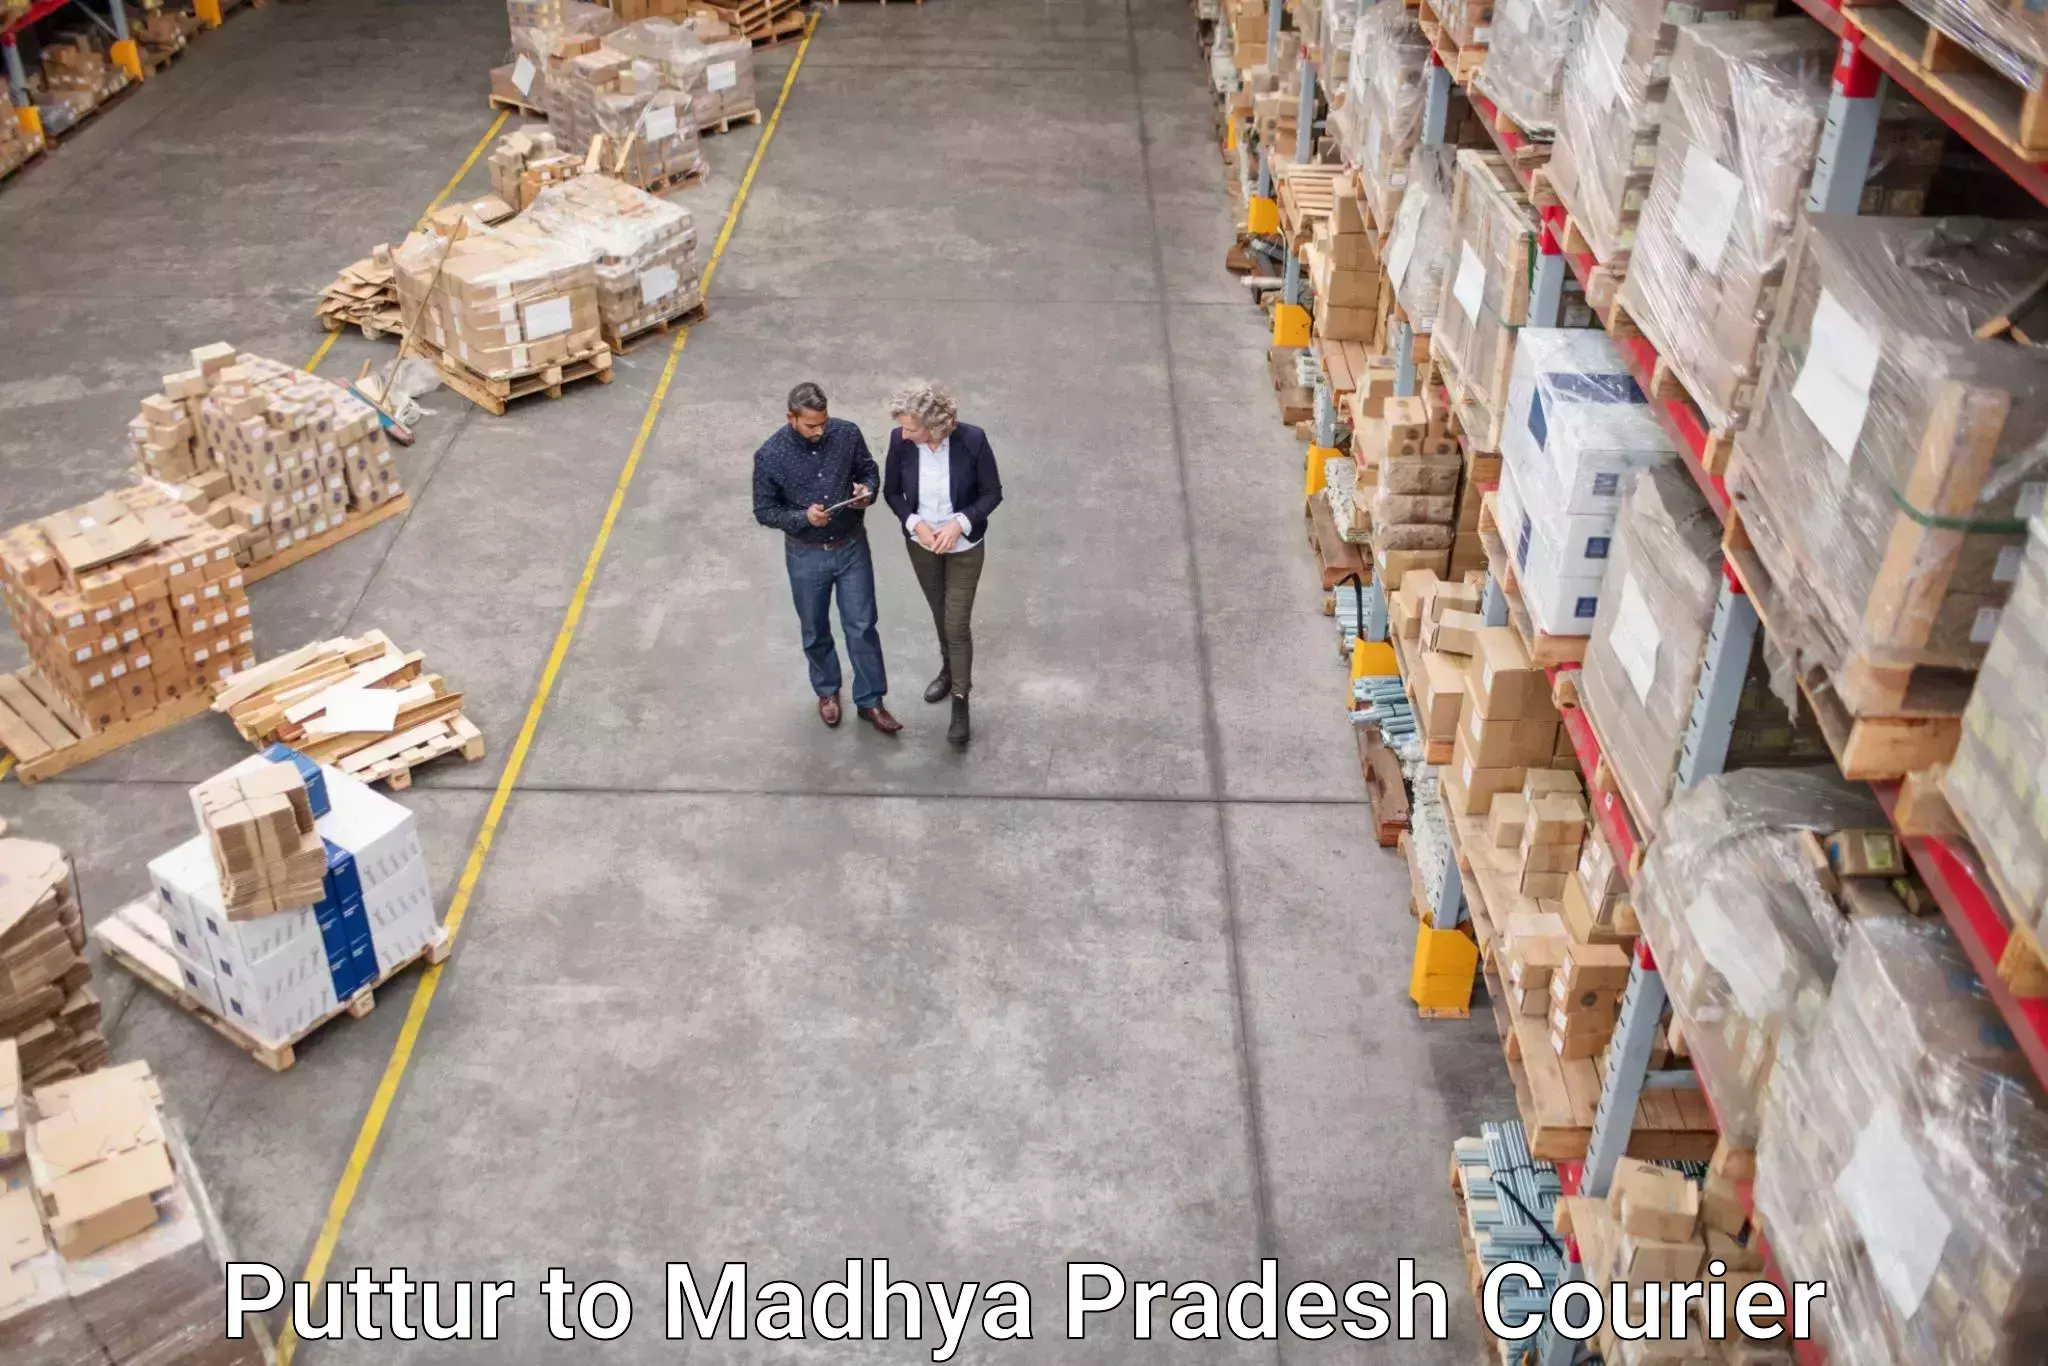 Multi-national courier services Puttur to Nagod